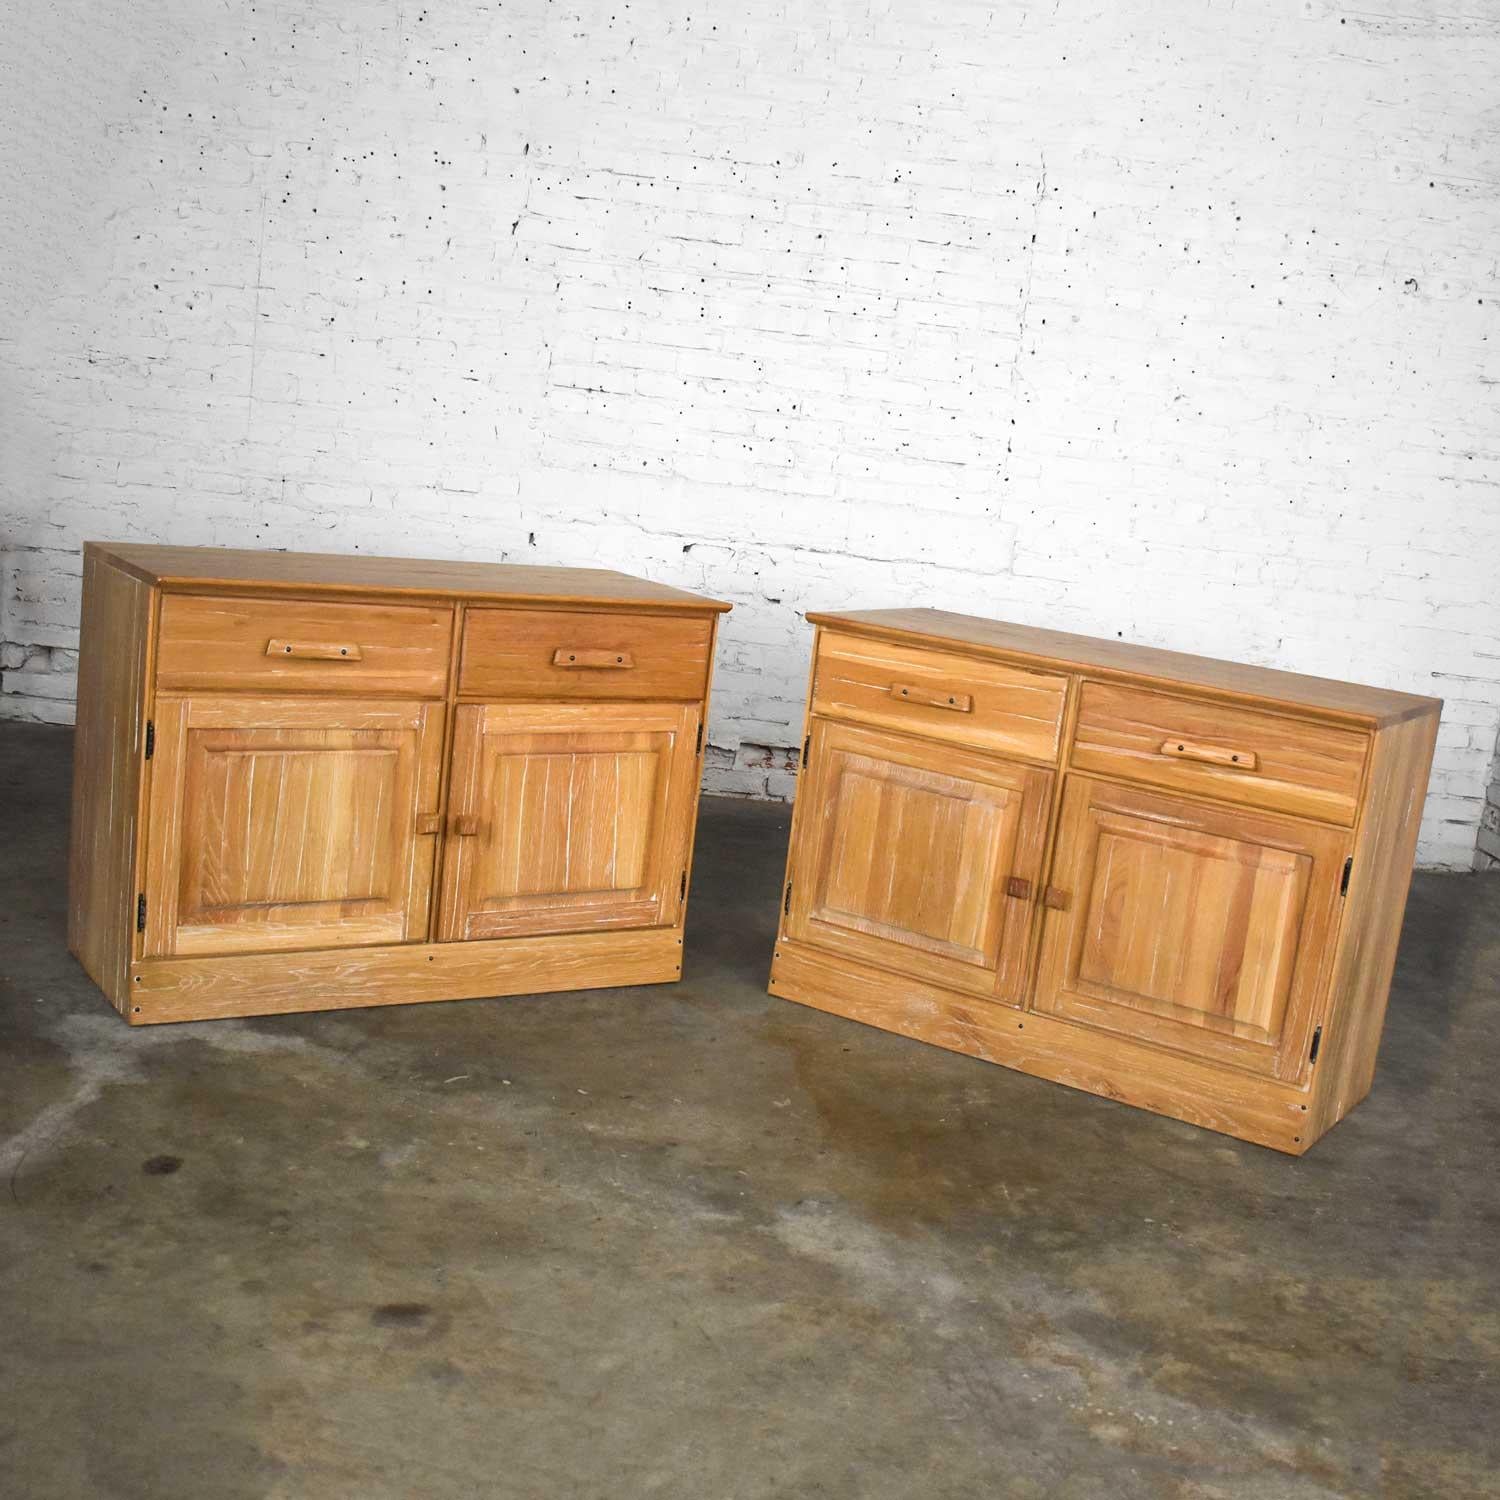 Fabulous pair of small credenzas or buffet cabinets by A. Brandt Company comprised of solid ranch oak with a natural oak finish. Wonderful vintage condition. One top has a joint crack that had occurred from age, but it has been repaired, it just